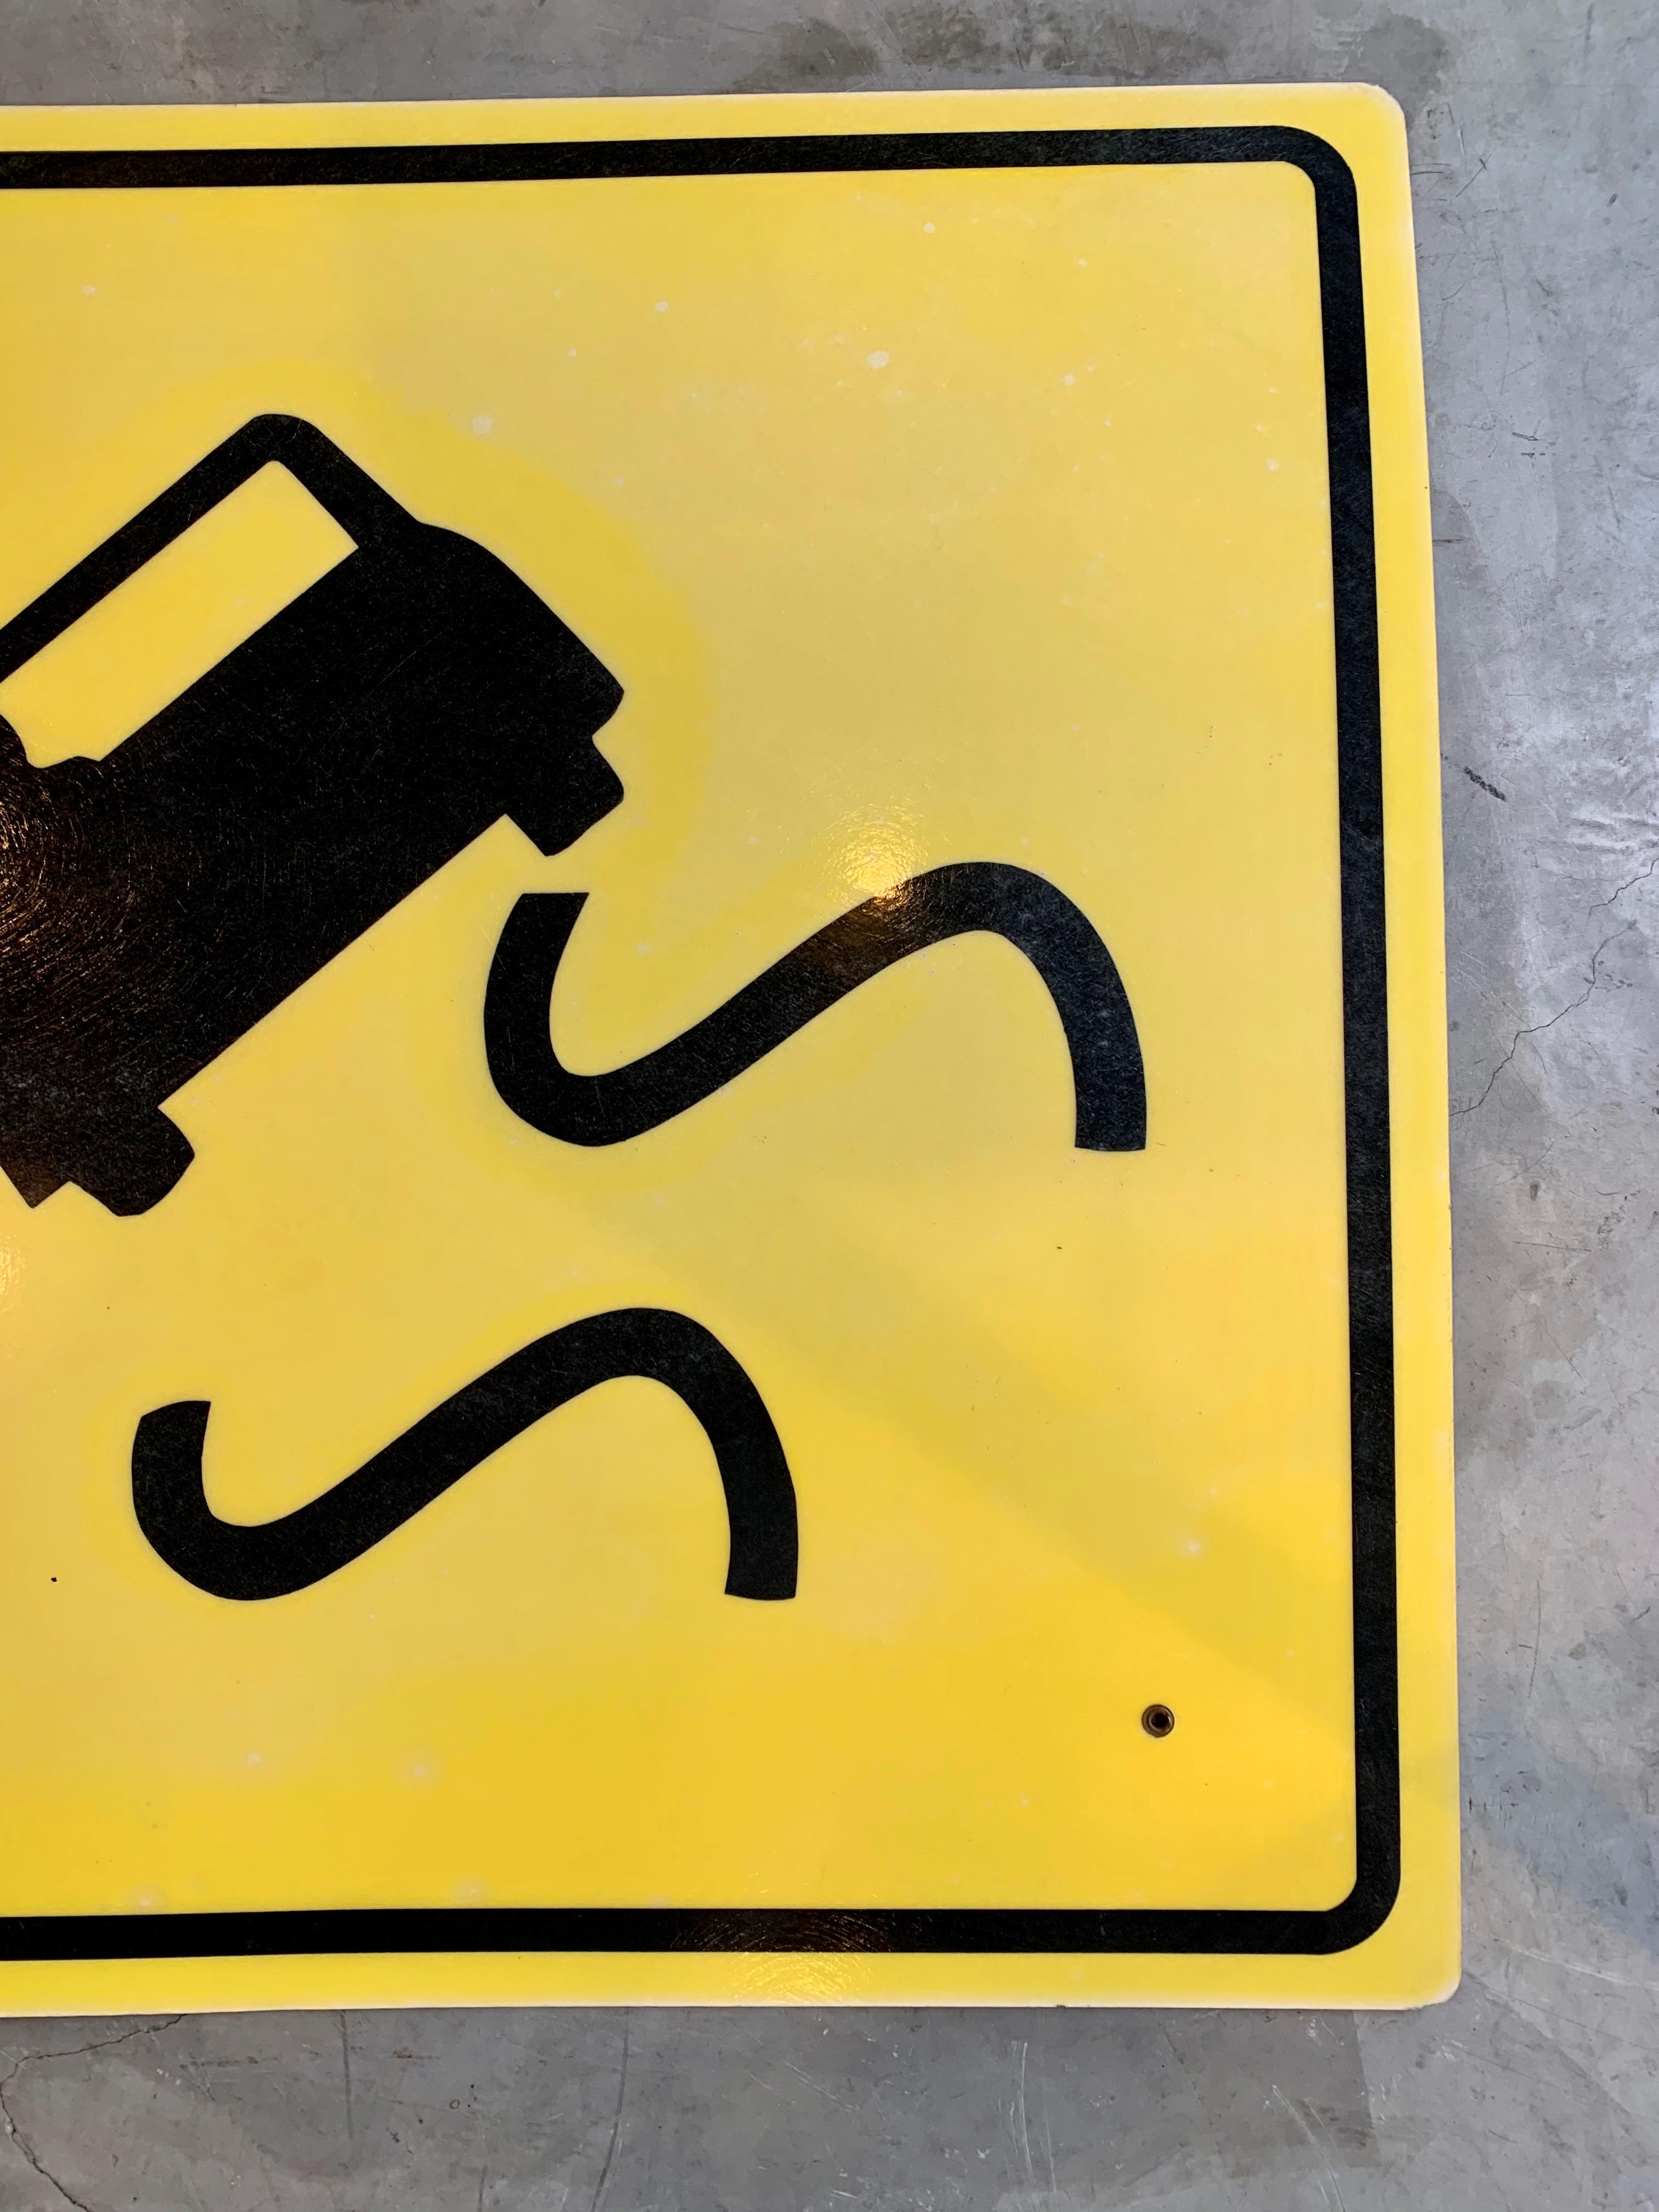 swerving car sign meaning